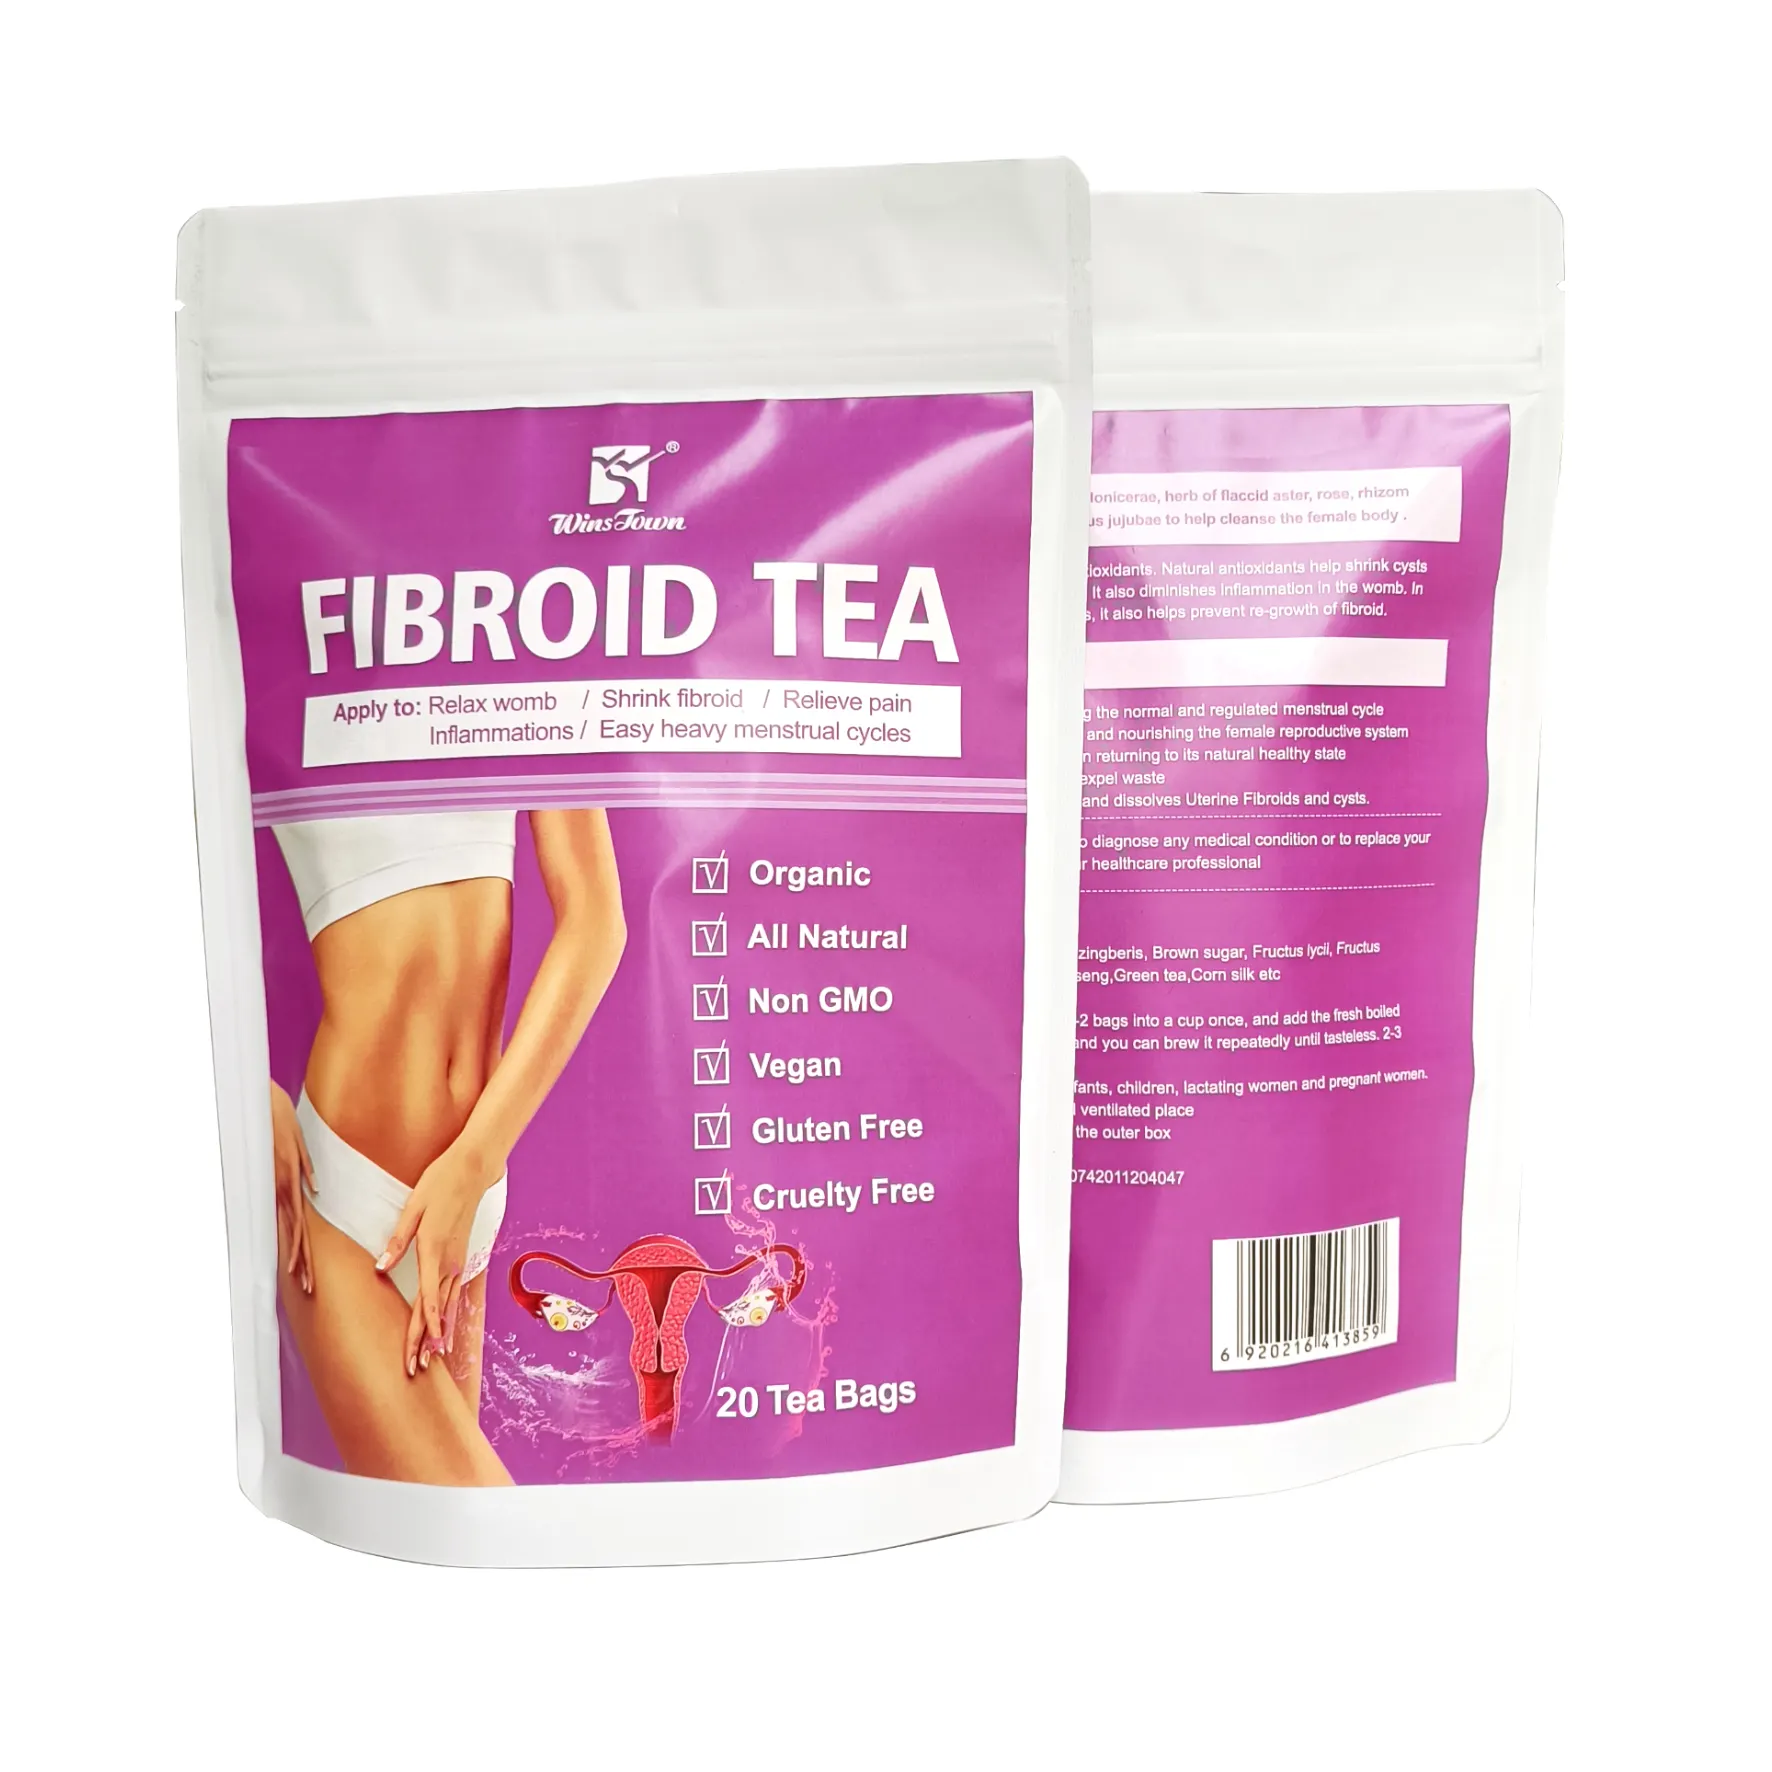 Wholesome fibroid tea clear womb toxins and waste for woman healthcare supplements custom fibroid tea